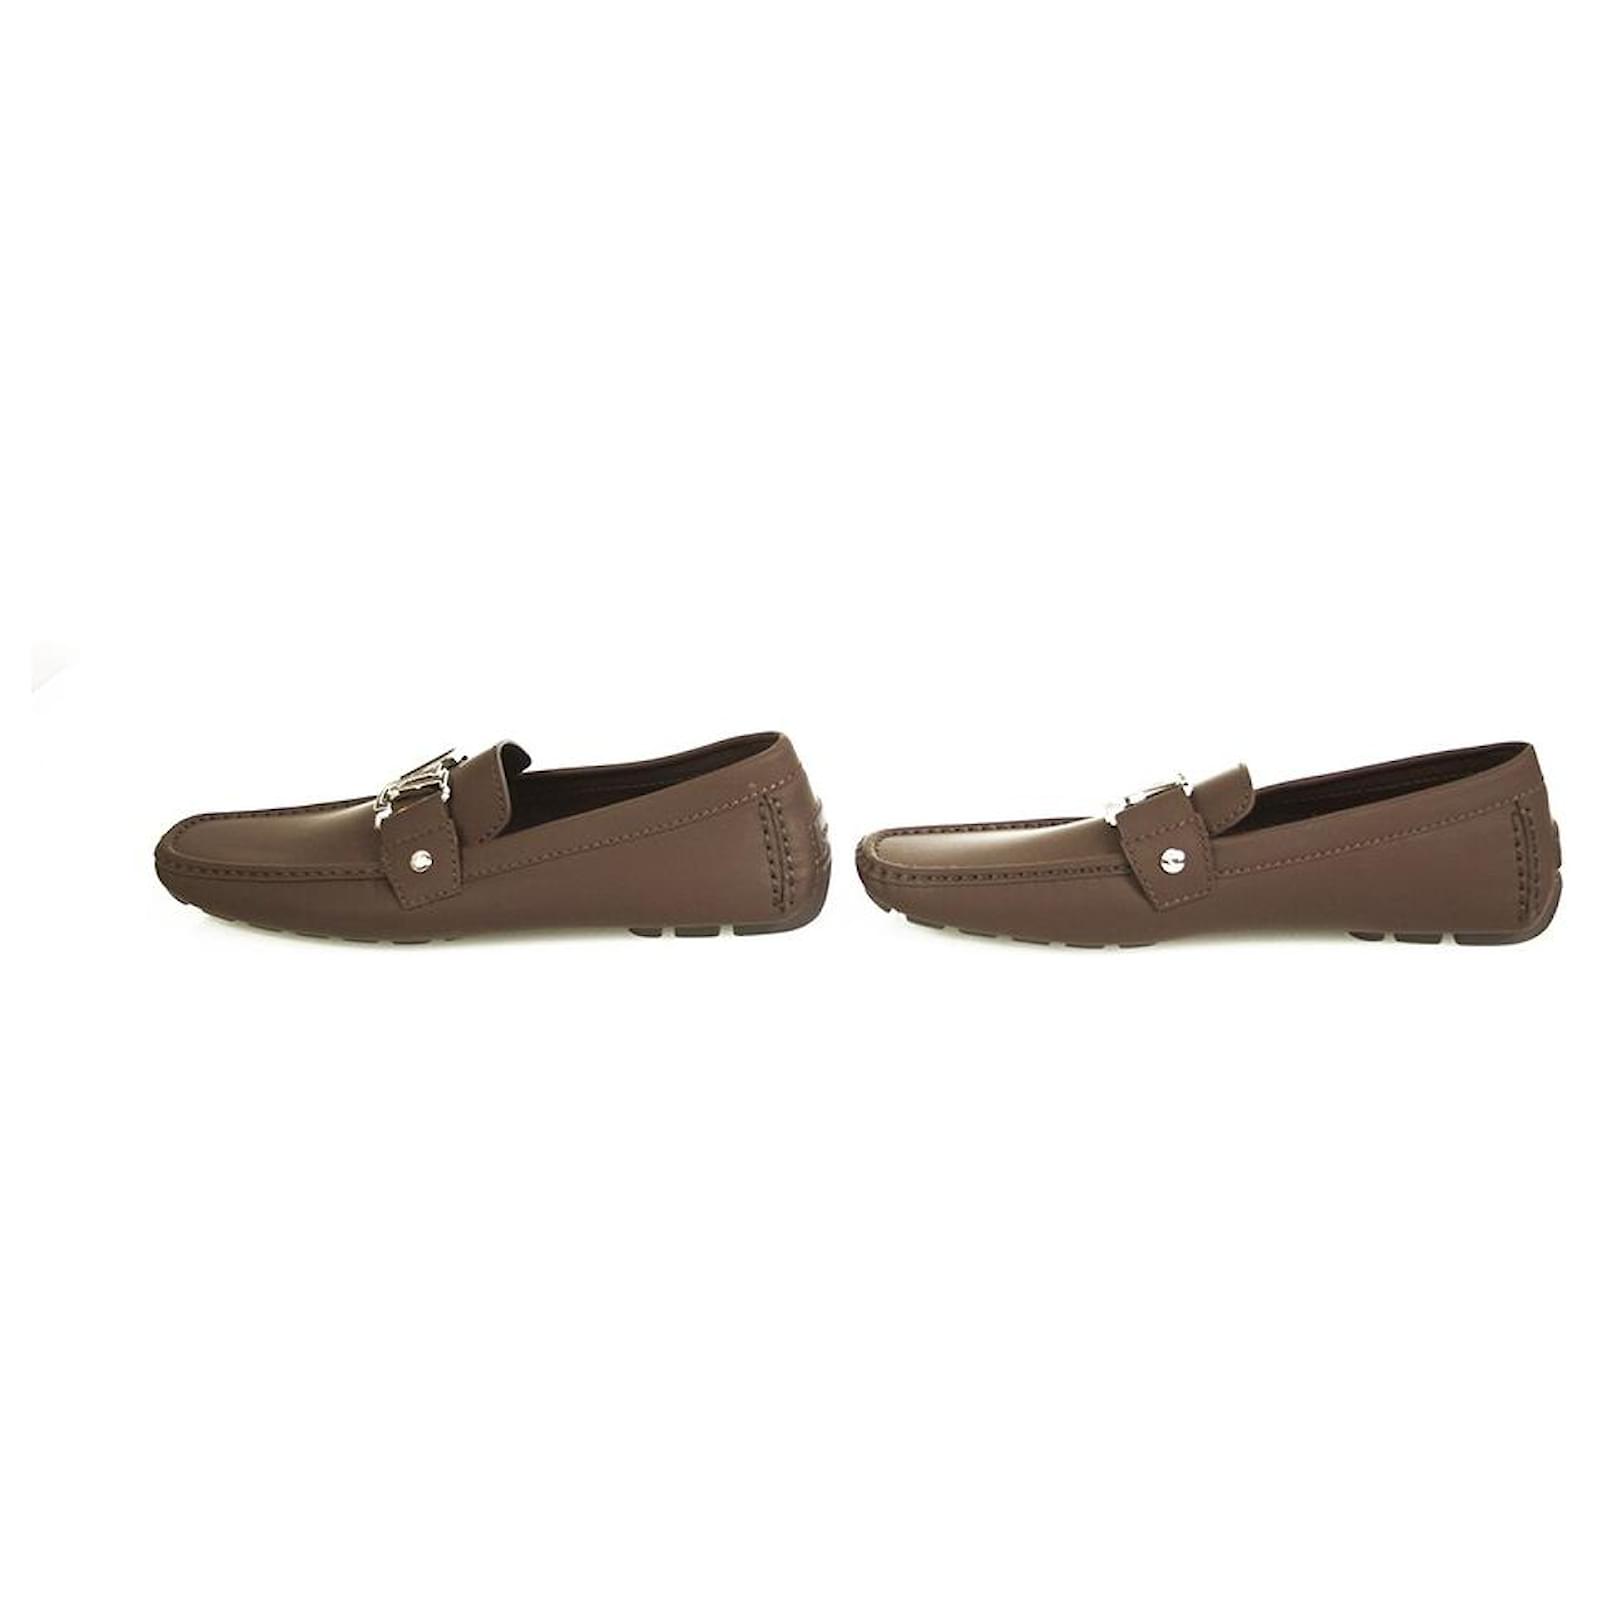 Monte carlo leather flats Louis Vuitton Brown size 7.5 UK in Leather -  27482928